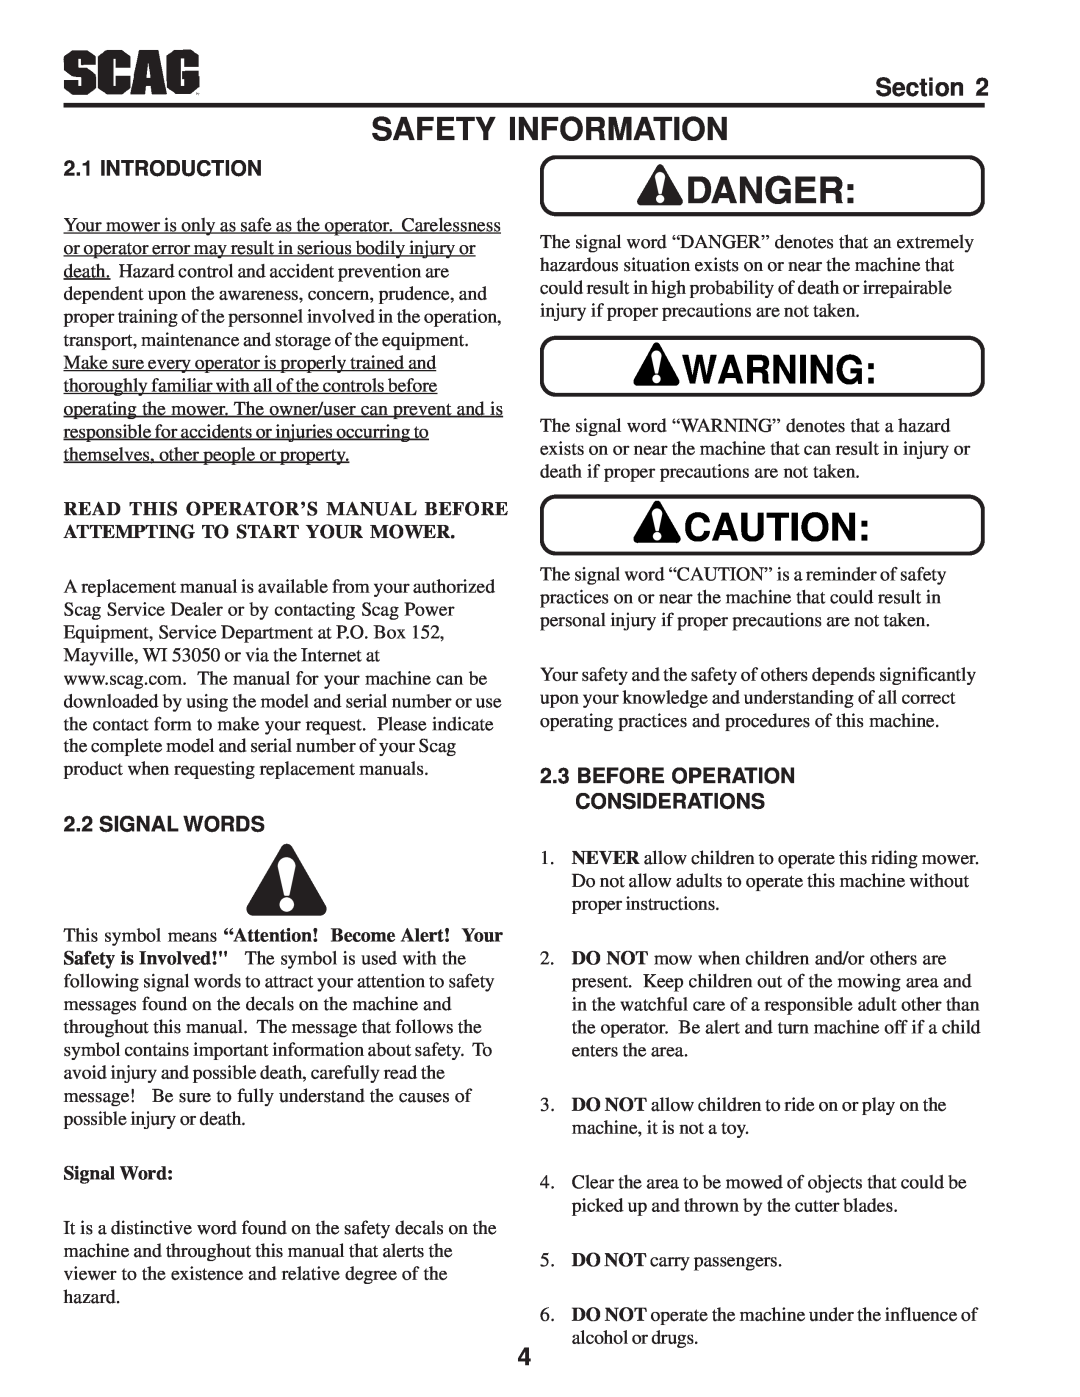 Scag Power Equipment SFZ manual Safety Information, Introduction, Signal Words, Before Operation Considerations 